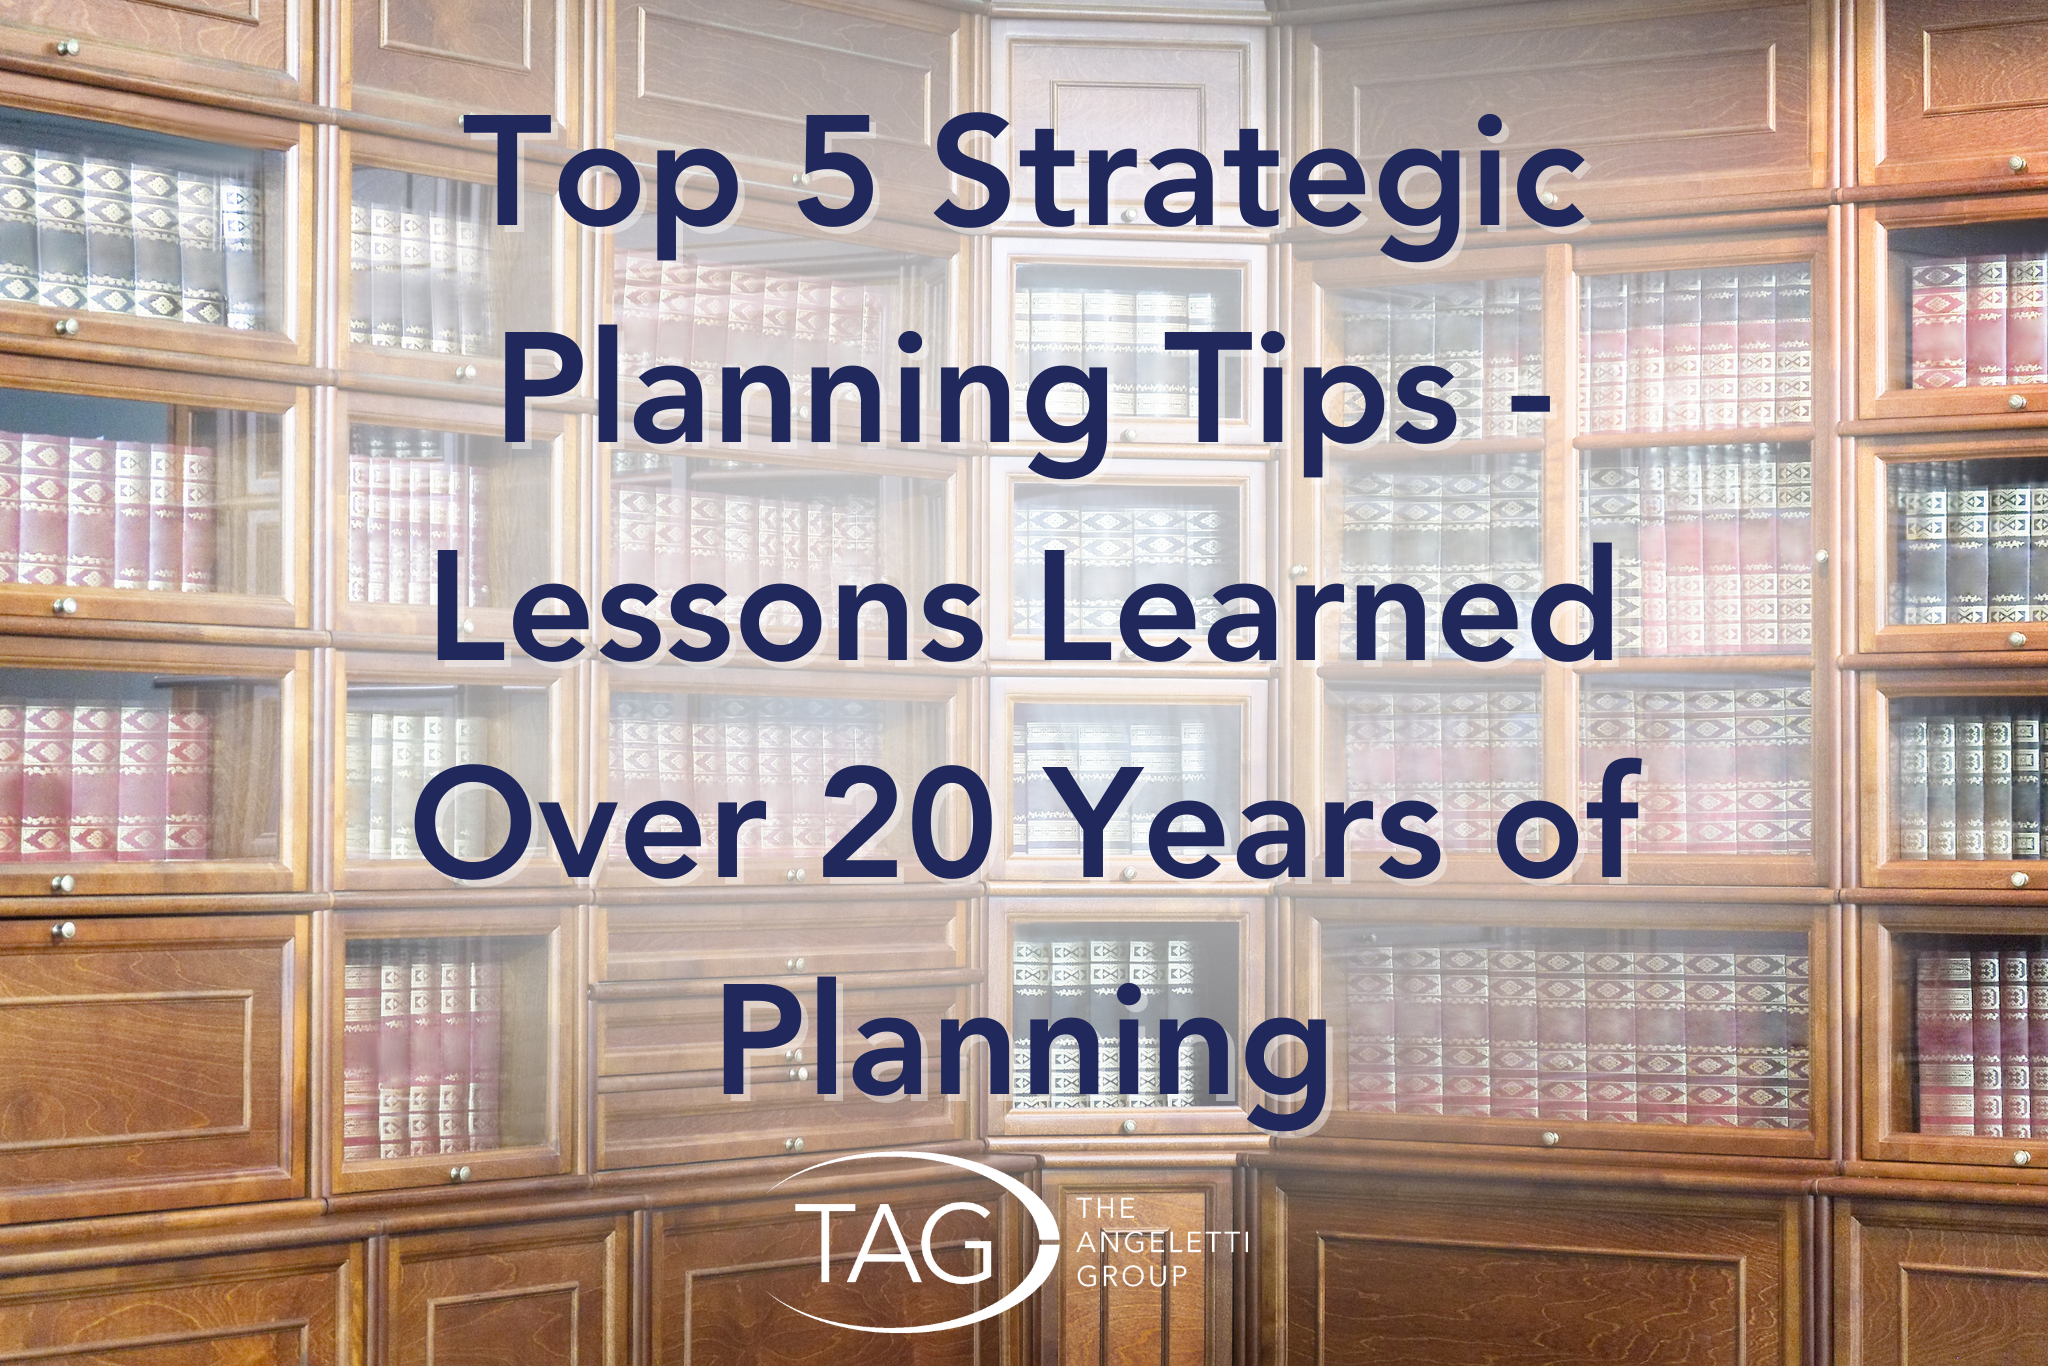 Top 5 Strategic Planning Tips - Lessons Learned over 20 Years of Planning